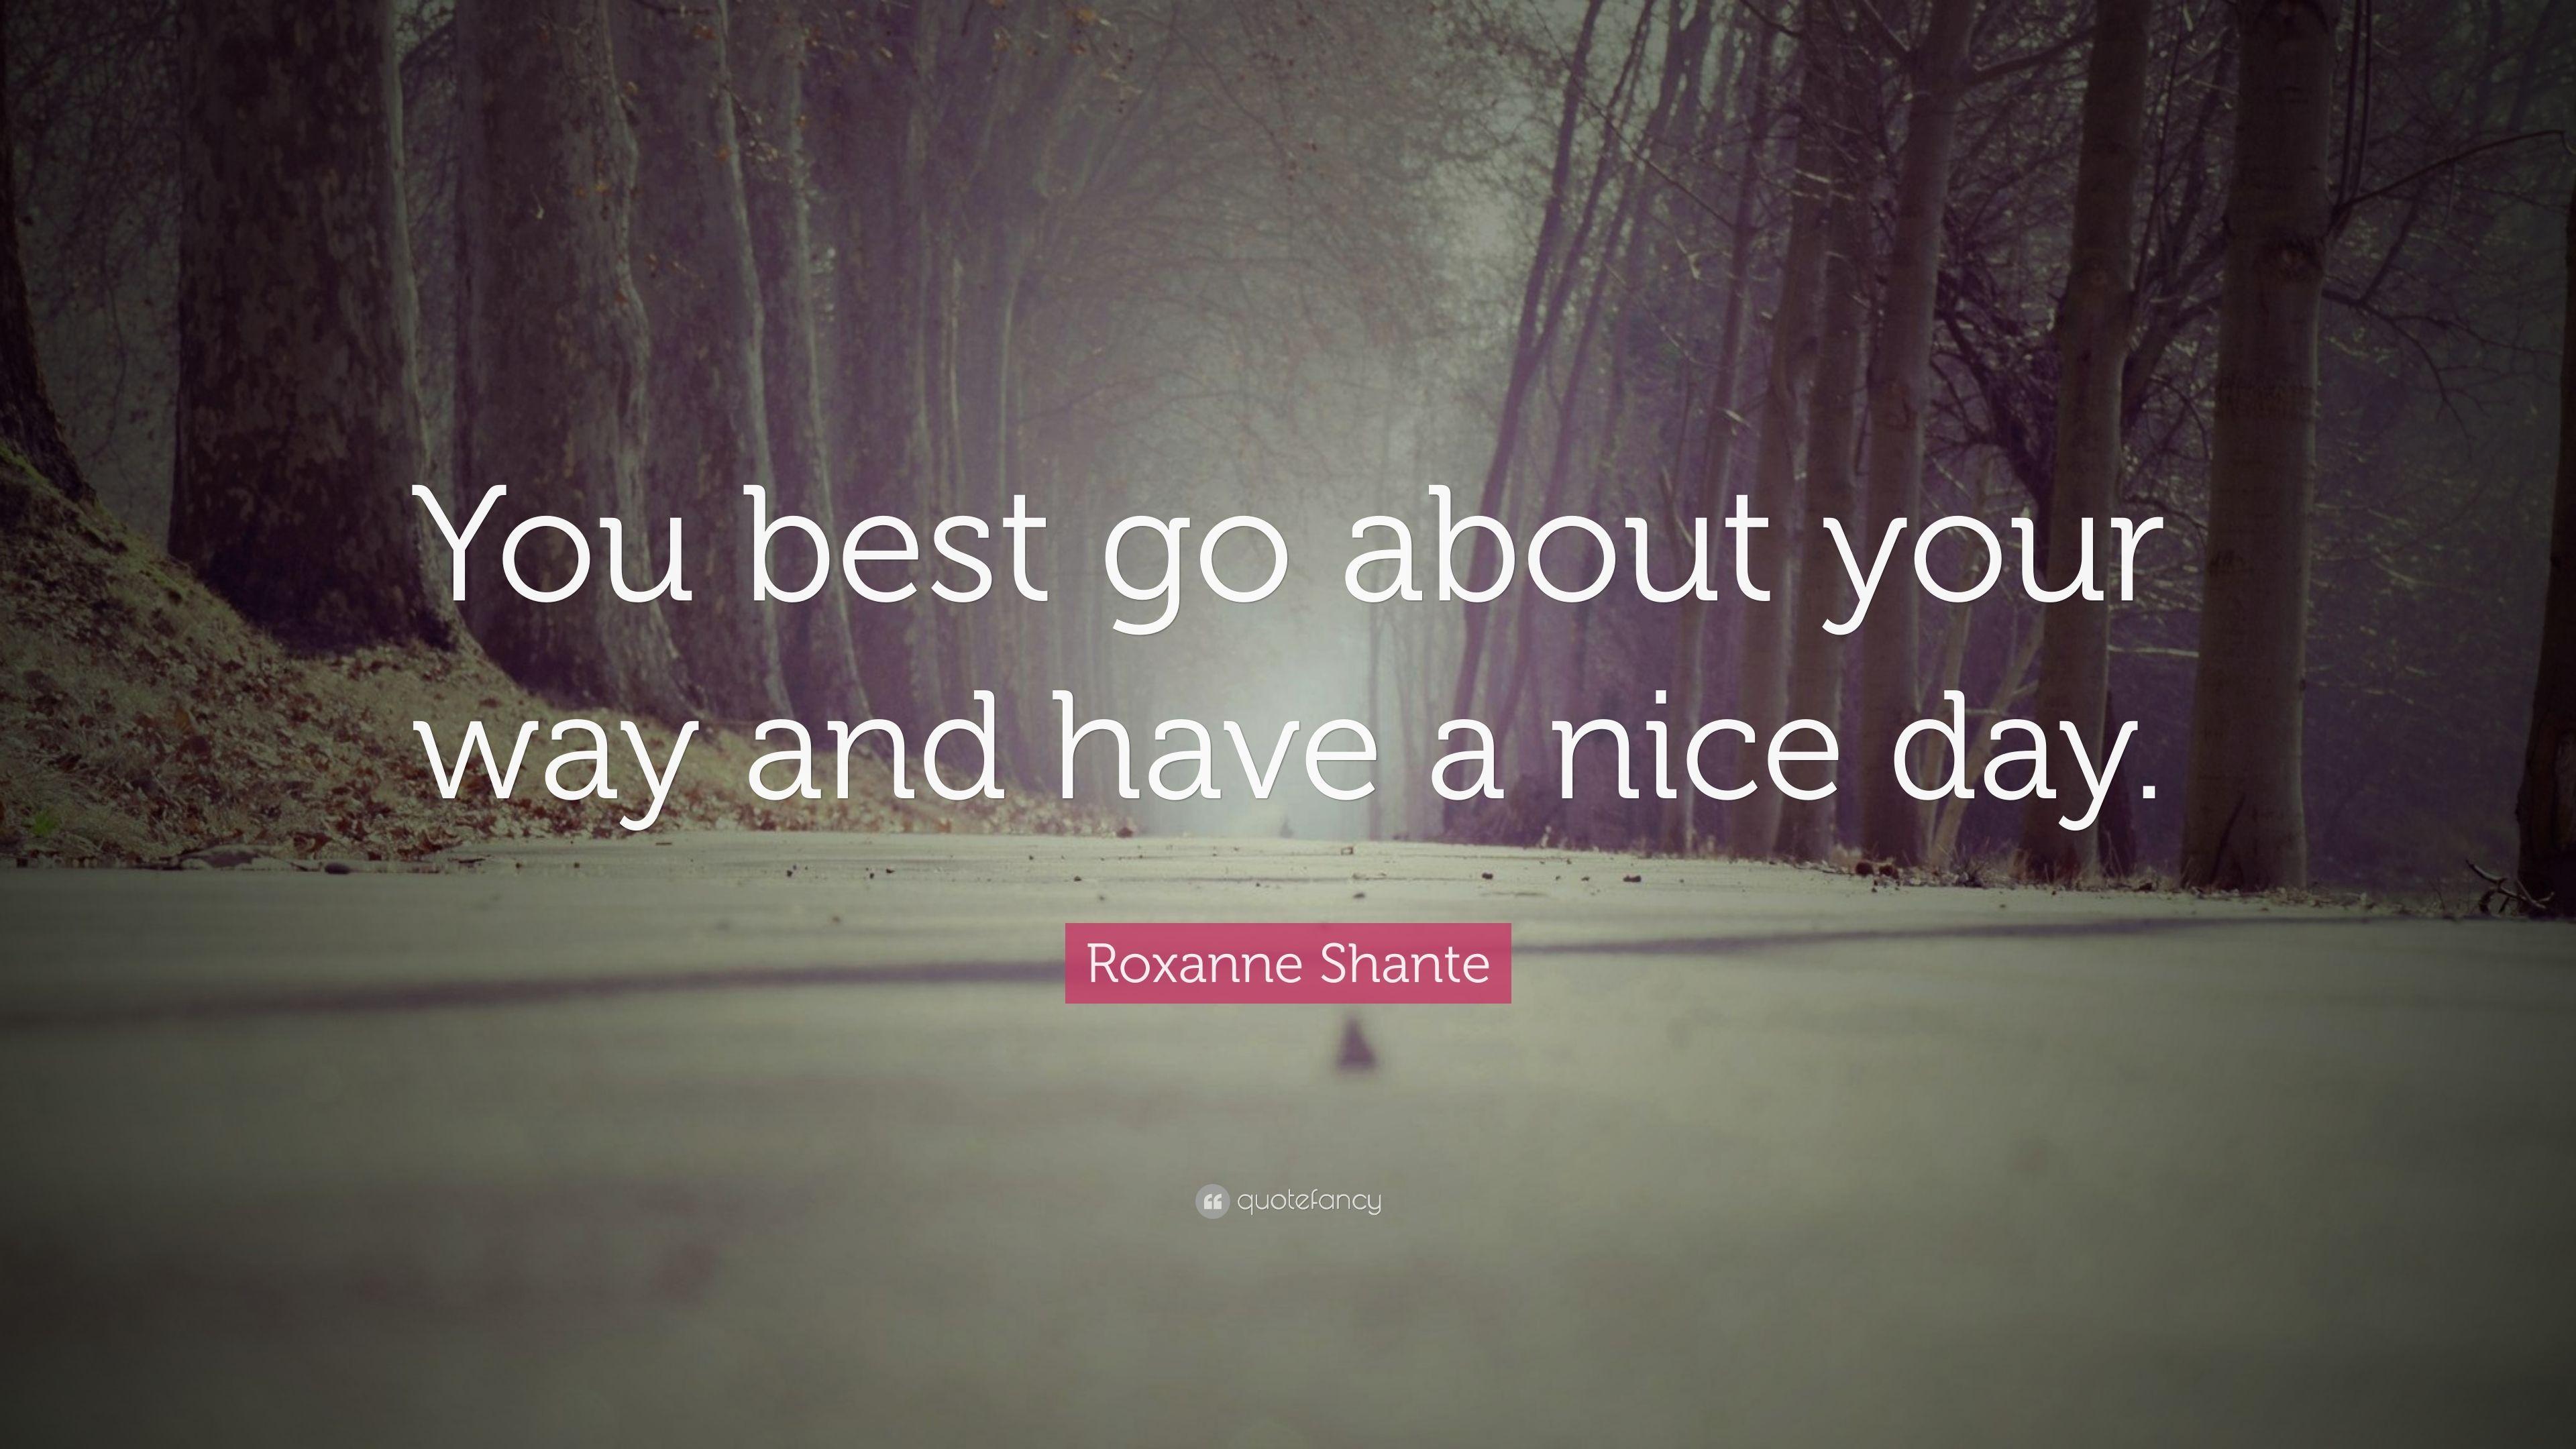 Roxanne Shante Quote: "You best go about your way and have a nice 